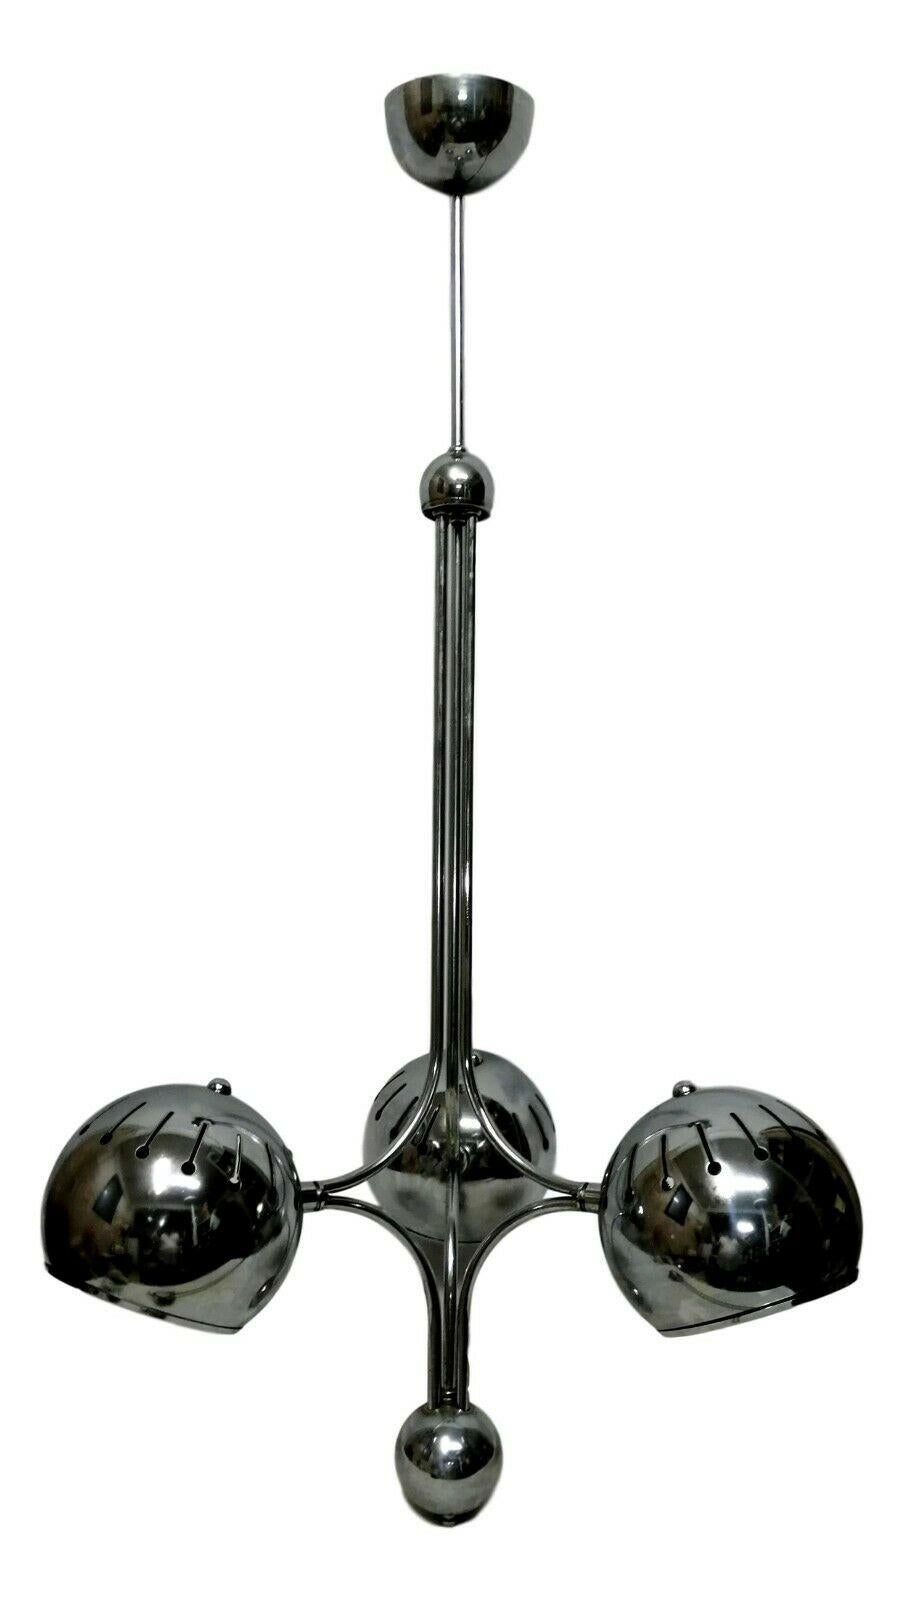 original 70s steel chandelier with three lights, Goffredo Reggiani production

composed of a central axis and three spheres, in the Classic Reggiani style, which can rotate at will to direct the light beam

it measures one meter in height, for a